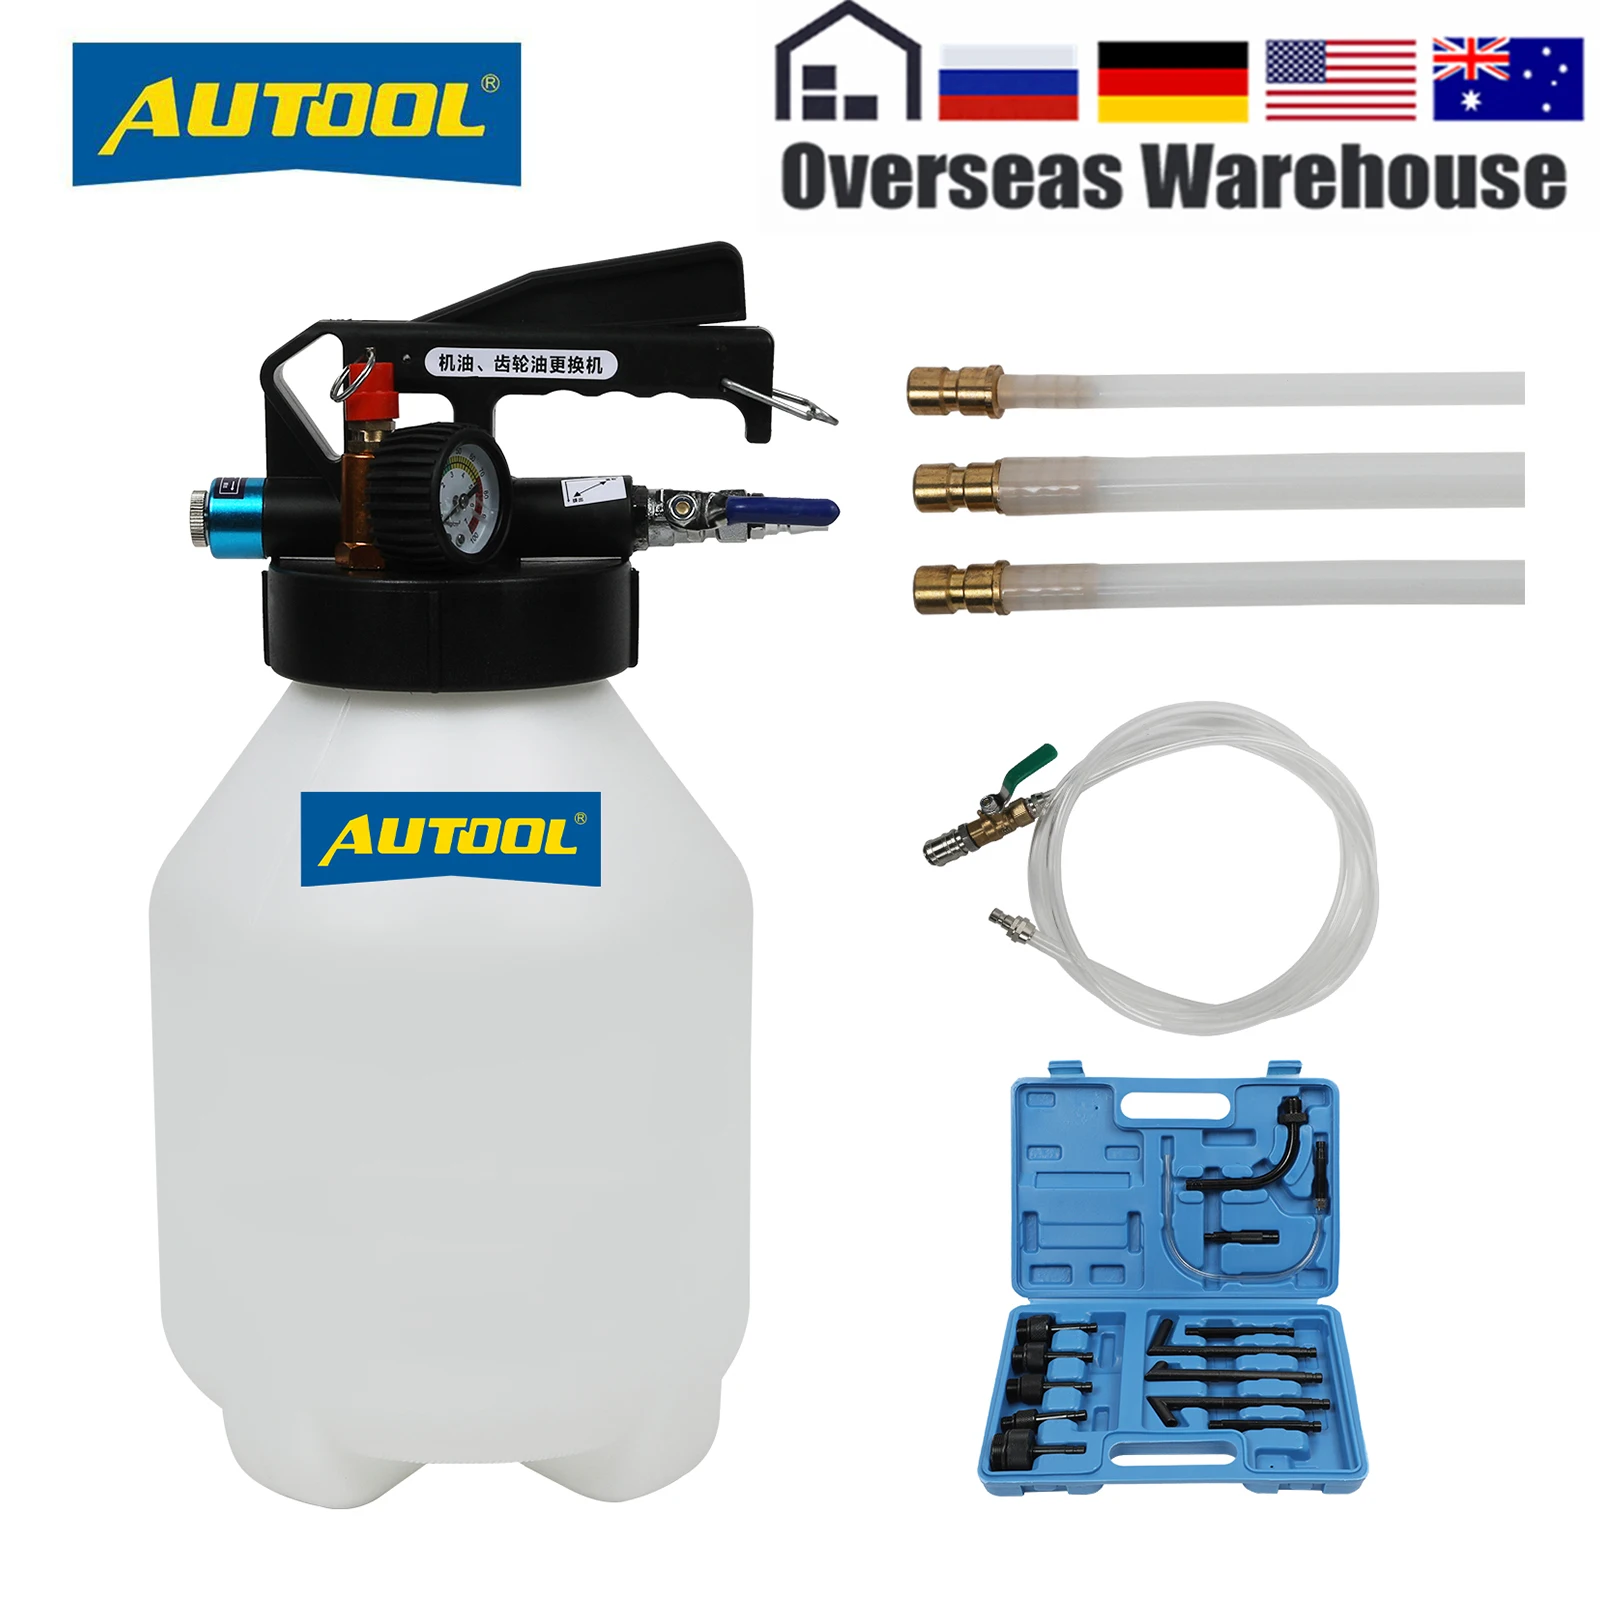 AUTOOL 6L Oil Changer Pneumatic Gearbox Oil Changer Filling System Automatic Transmission Oil Filling Tool Automatic Tanker